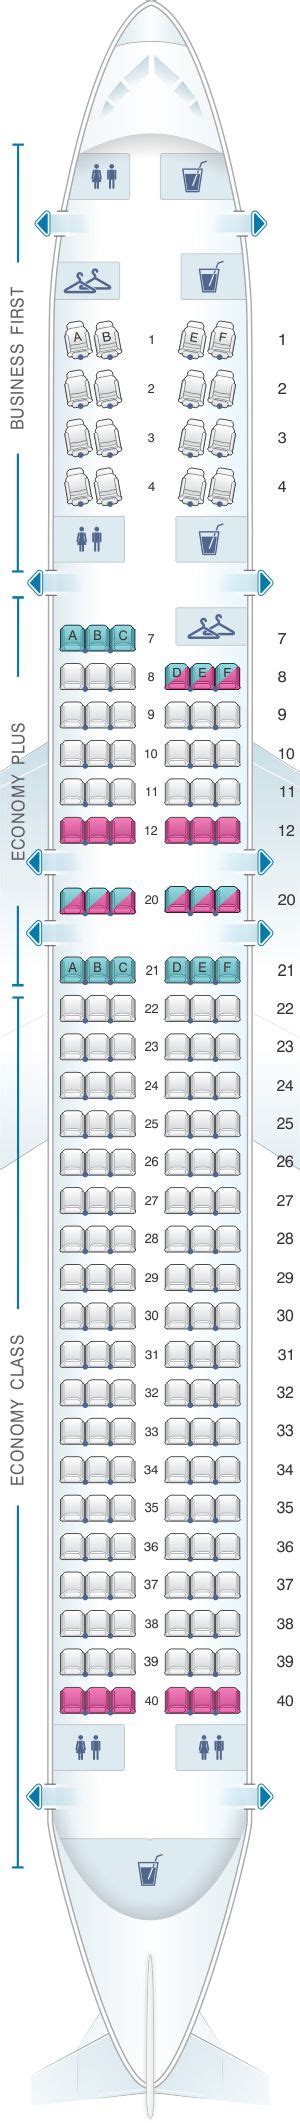 Seat Map United Airlines Boeing B757 200 752 Version 1 Ce1